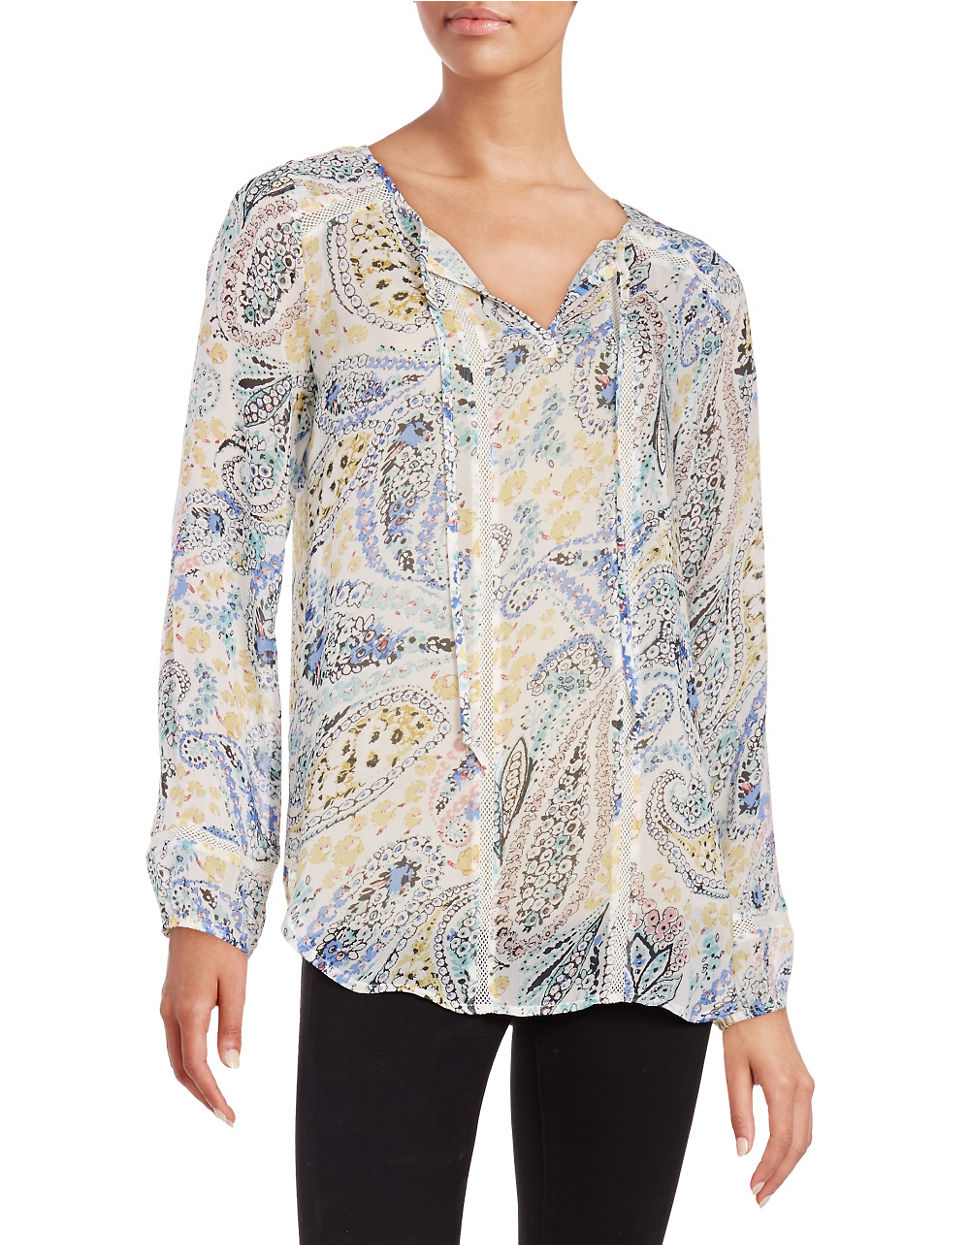 Lyst - Lucky Brand Paisley Peasant Blouse in Blue